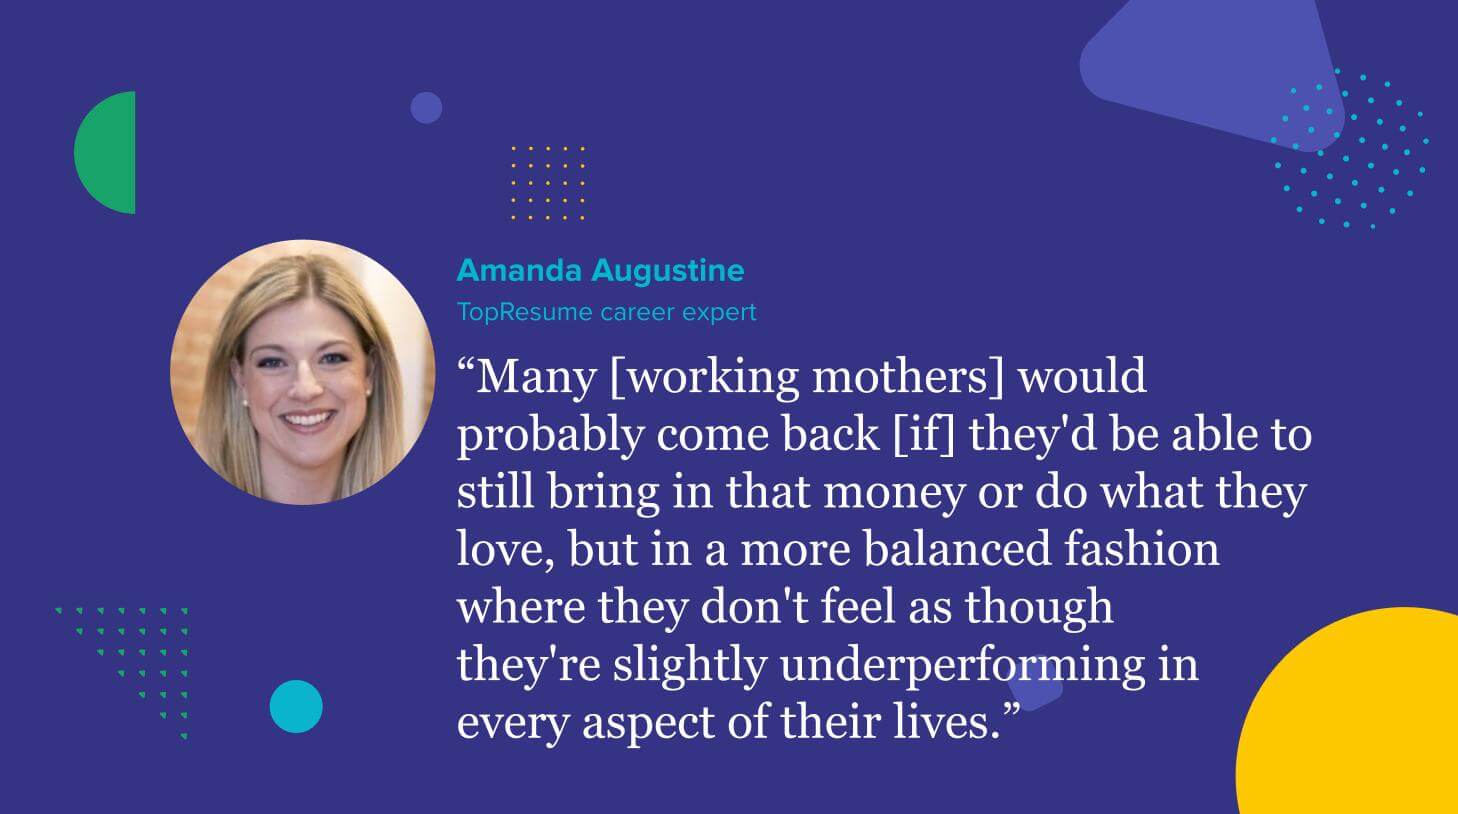 “Many [working mothers] would probably come back [if] they'd be able to still bring in that money or do what they love, but in a more balanced fashion where they don't feel as though they're slightly underperforming in every aspect of their lives.”